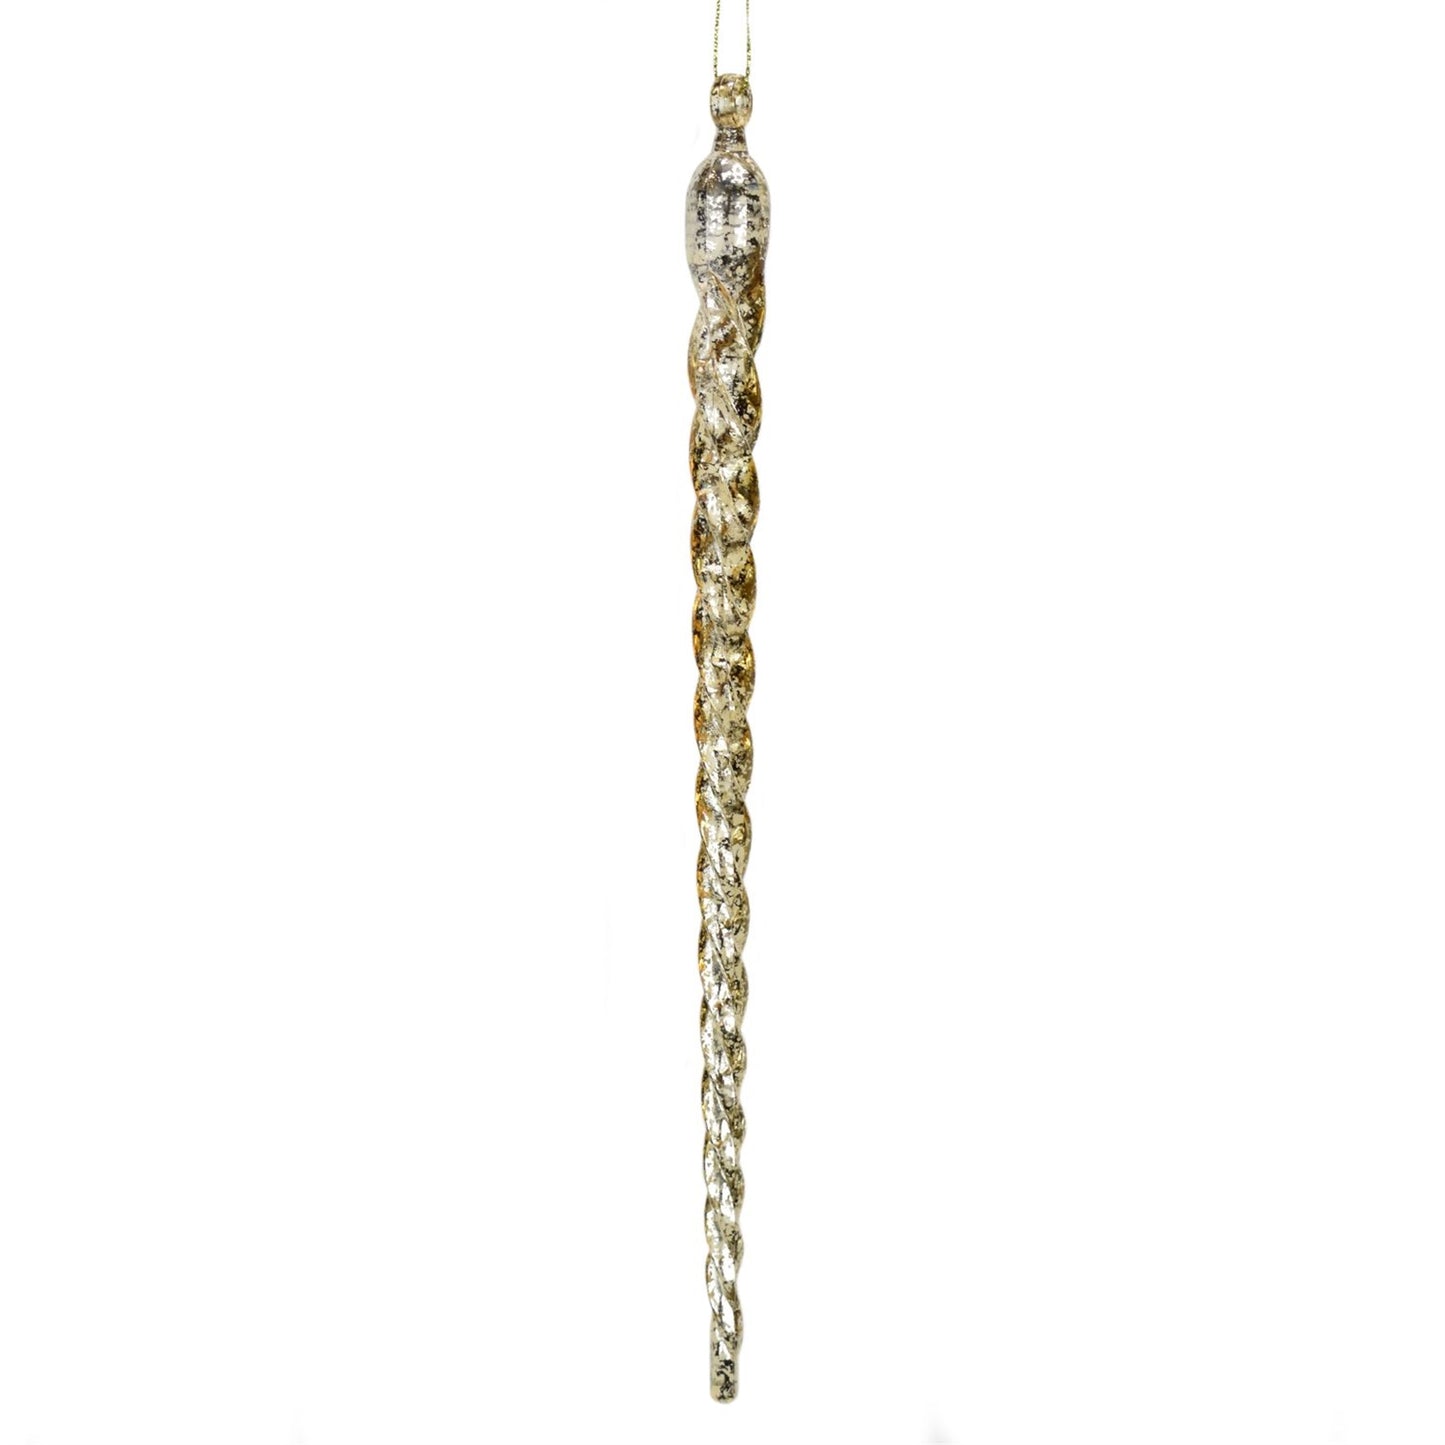 11" Antique Crystal Icicle in Champagne | XJB